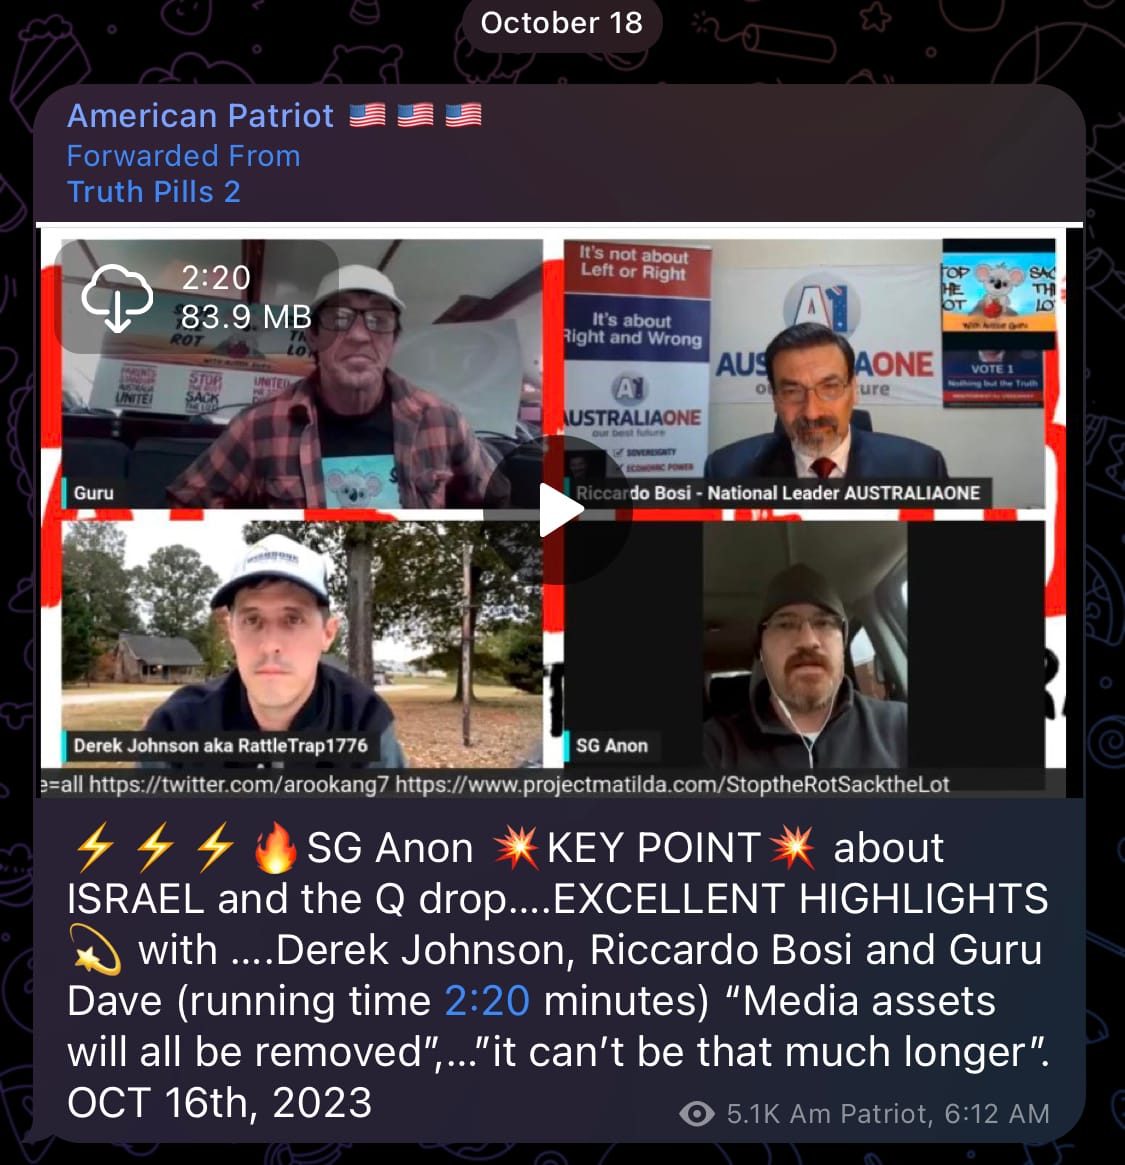 ⚡️⚡️⚡️🔥SG Anon 💥KEY POINT💥 about ISRAEL and the Q drop….EXCELLENT HIGHLIGHTS 💫 with ….Derek Johnson, Riccardo Bosi and Guru Dave